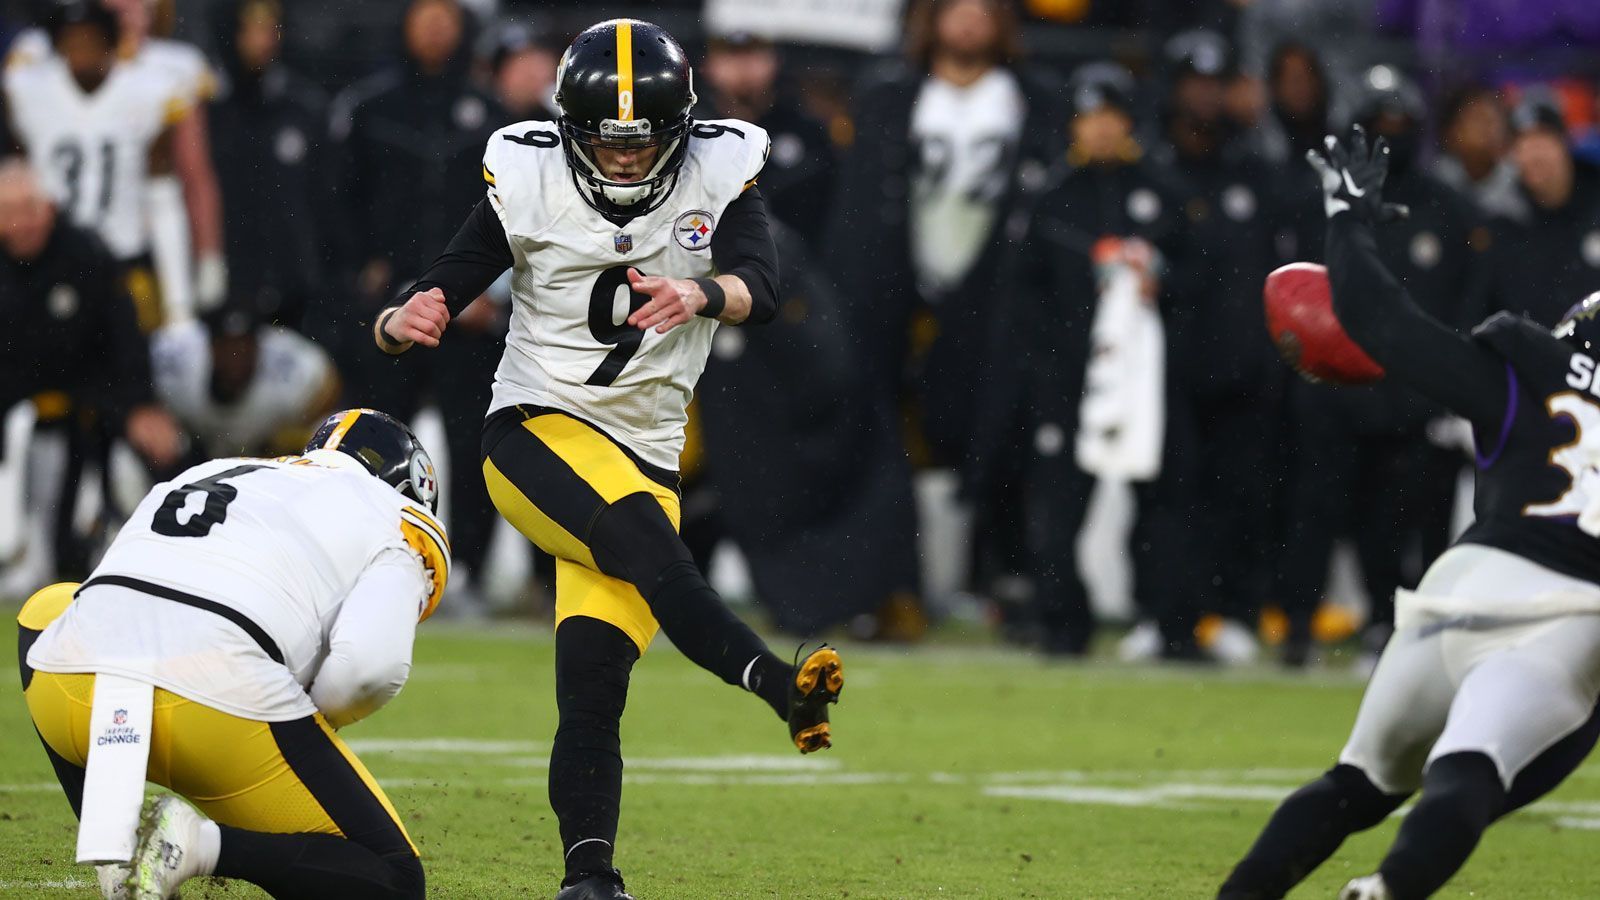 
                <strong>Platz 4 (geteilt): Chris Boswell</strong><br>
                &#x2022; Team: Pittsburgh Steelers<br>&#x2022; <strong>Overall Rating: 82</strong><br>&#x2022; Key Stats: Kick Power: 95 – Kick Accuracy: 91 – Stamina: 84<br>
              